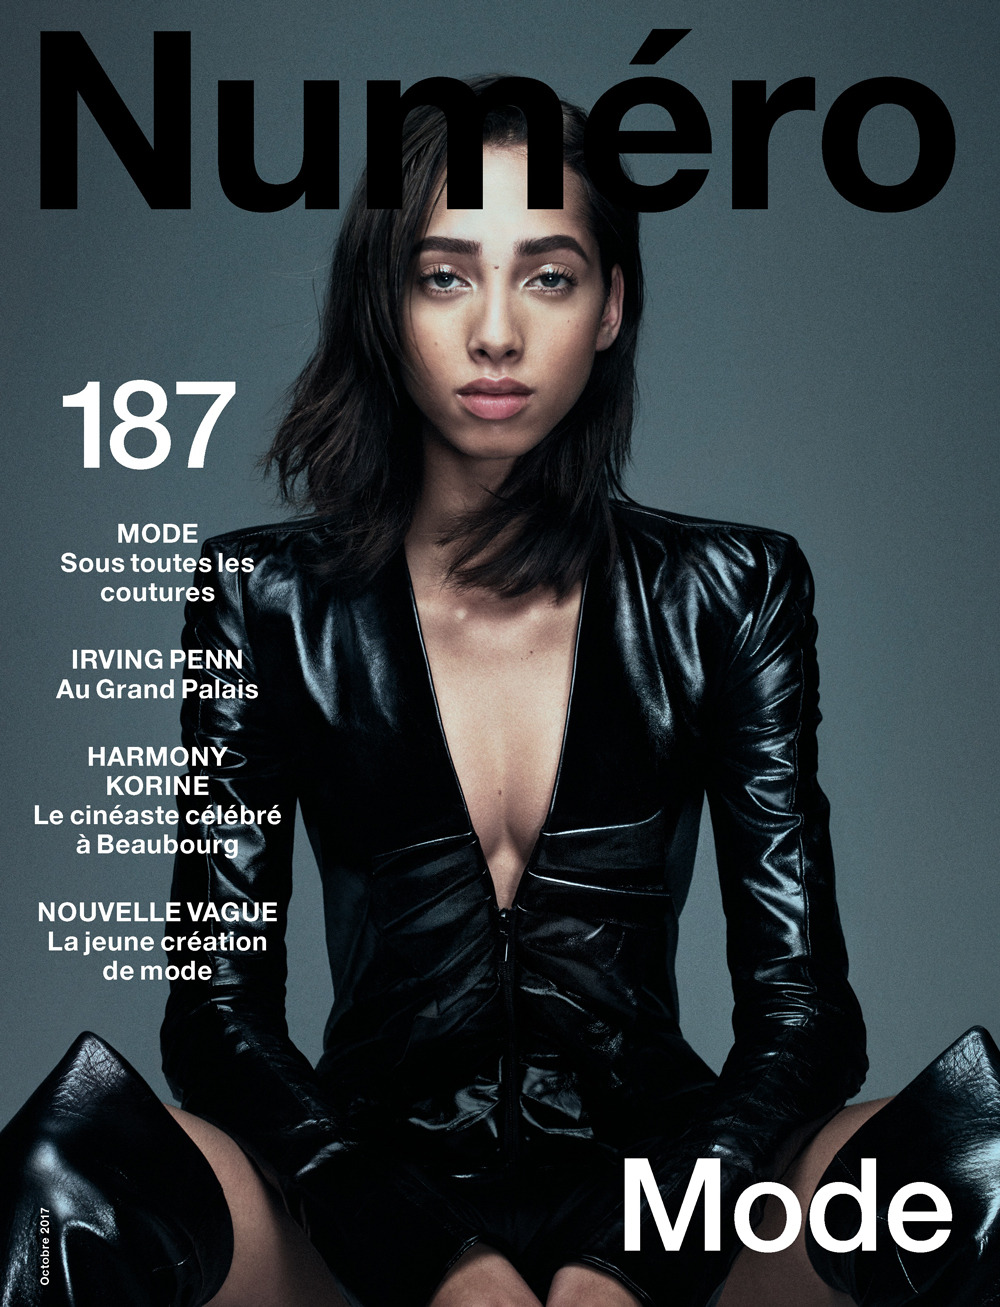 Numéro #187 October 2017 Cover Story Editorial